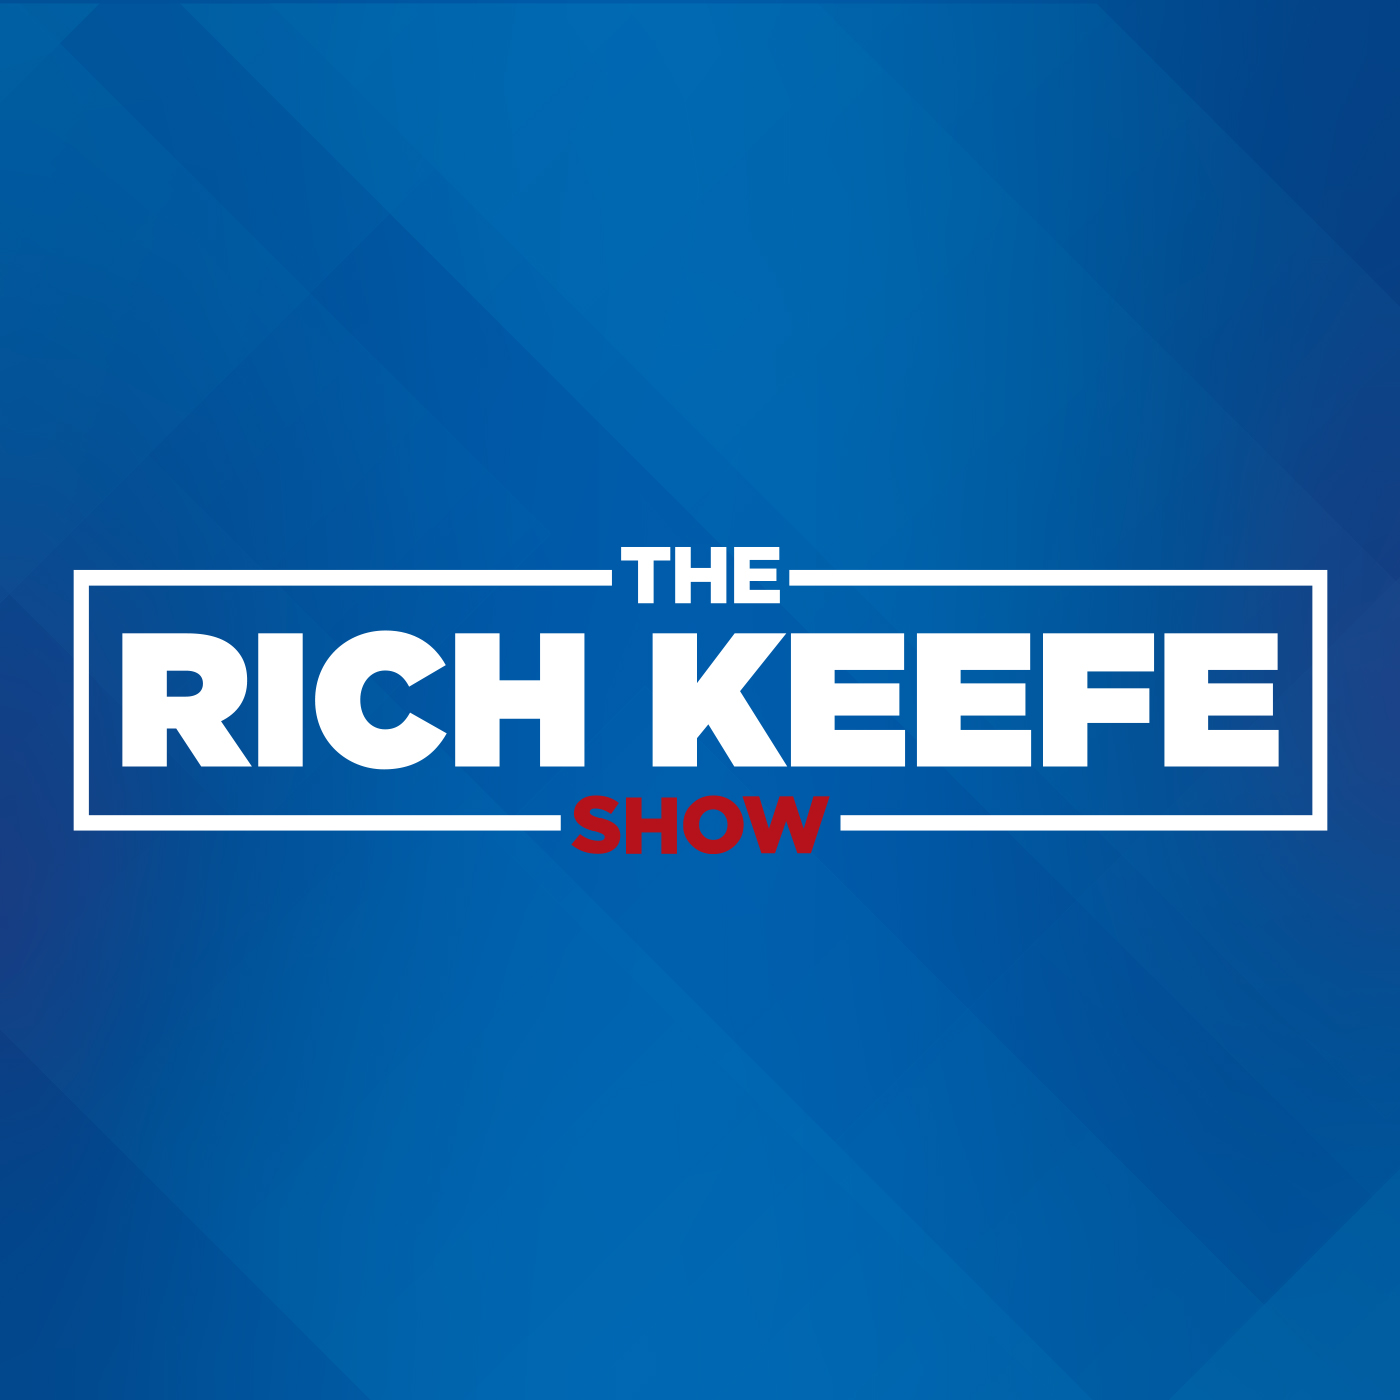 The Rich Keefe Show